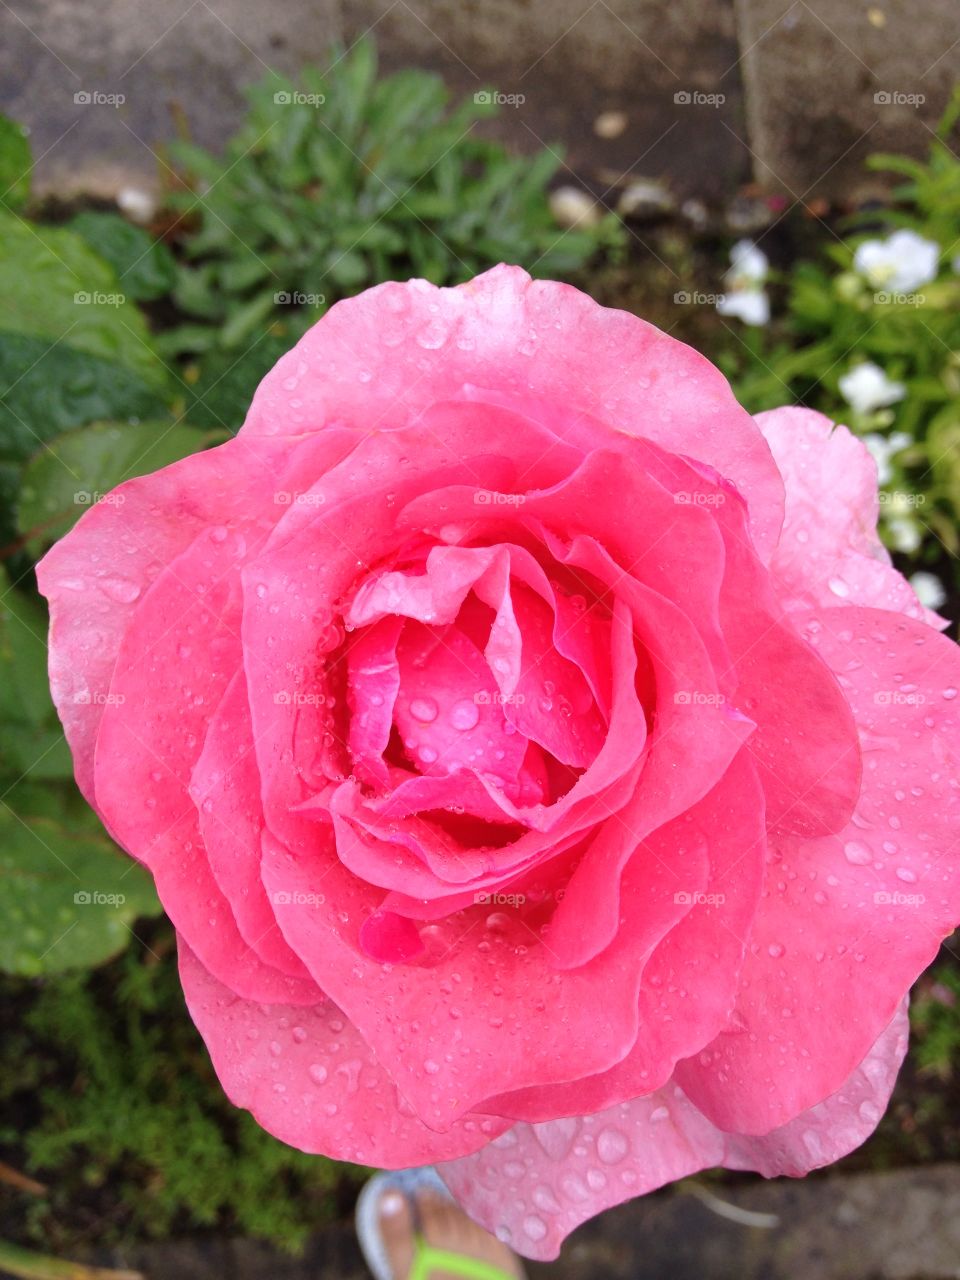 Roses are pink